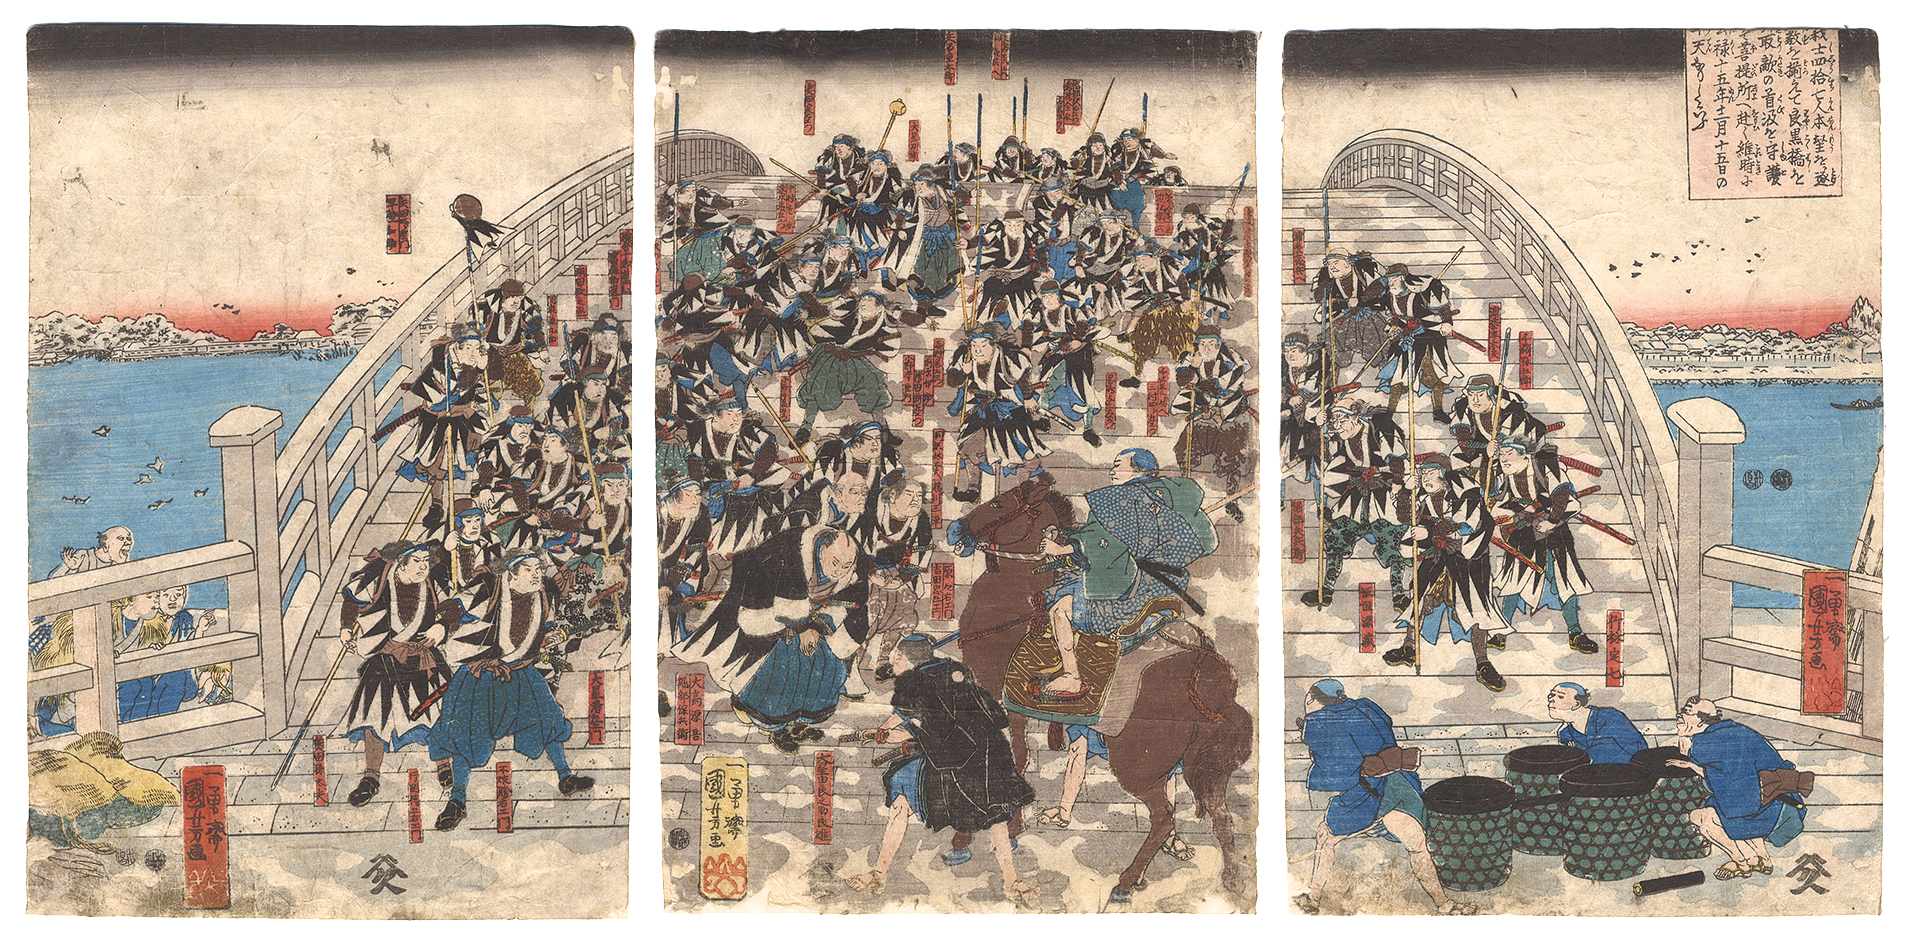 Kuniyoshi “Early in the Morning of the 15th Day of the 12th Month, 1702, the 47 Loyal Retainers, Having Achieved Their Goal, All Crossed Ryogoku Bridge with the Head of Their Enemy and Proceeded to the Memorial Temple”／